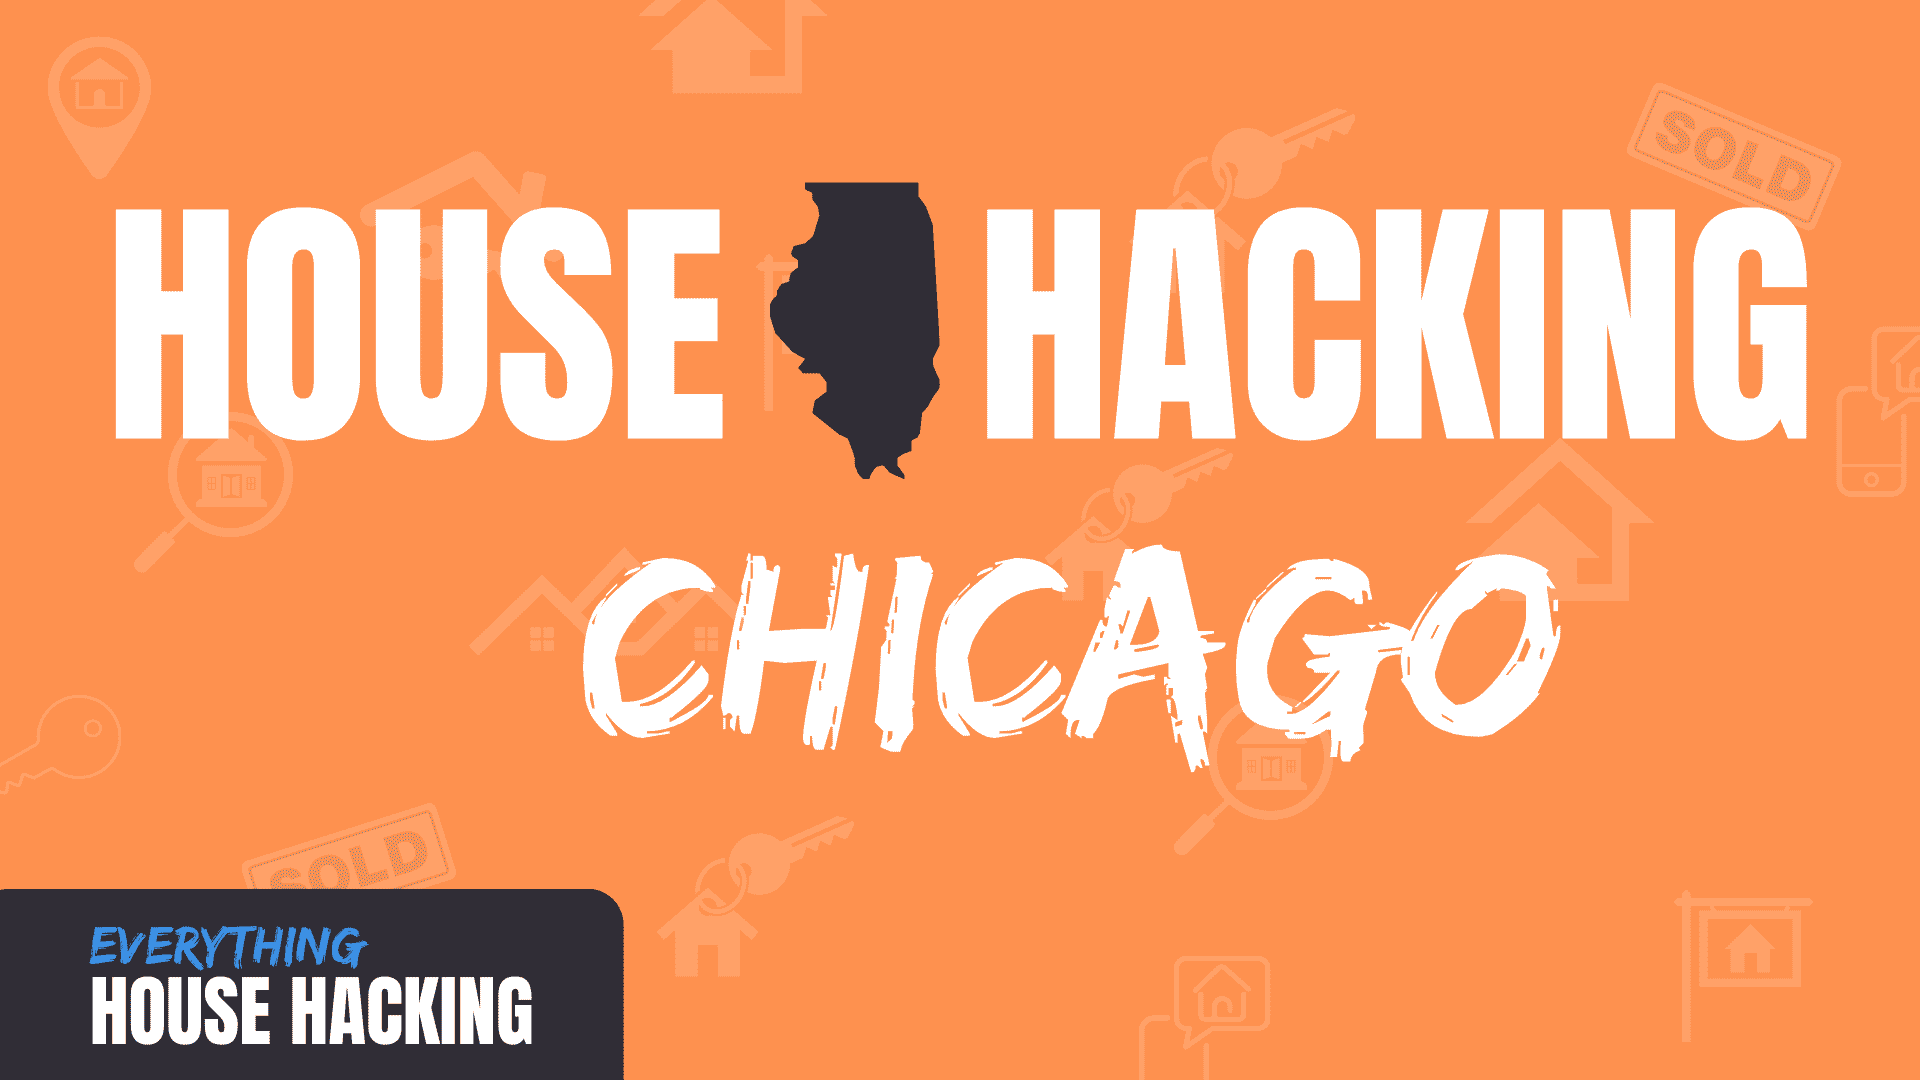 House Hacking Chicago